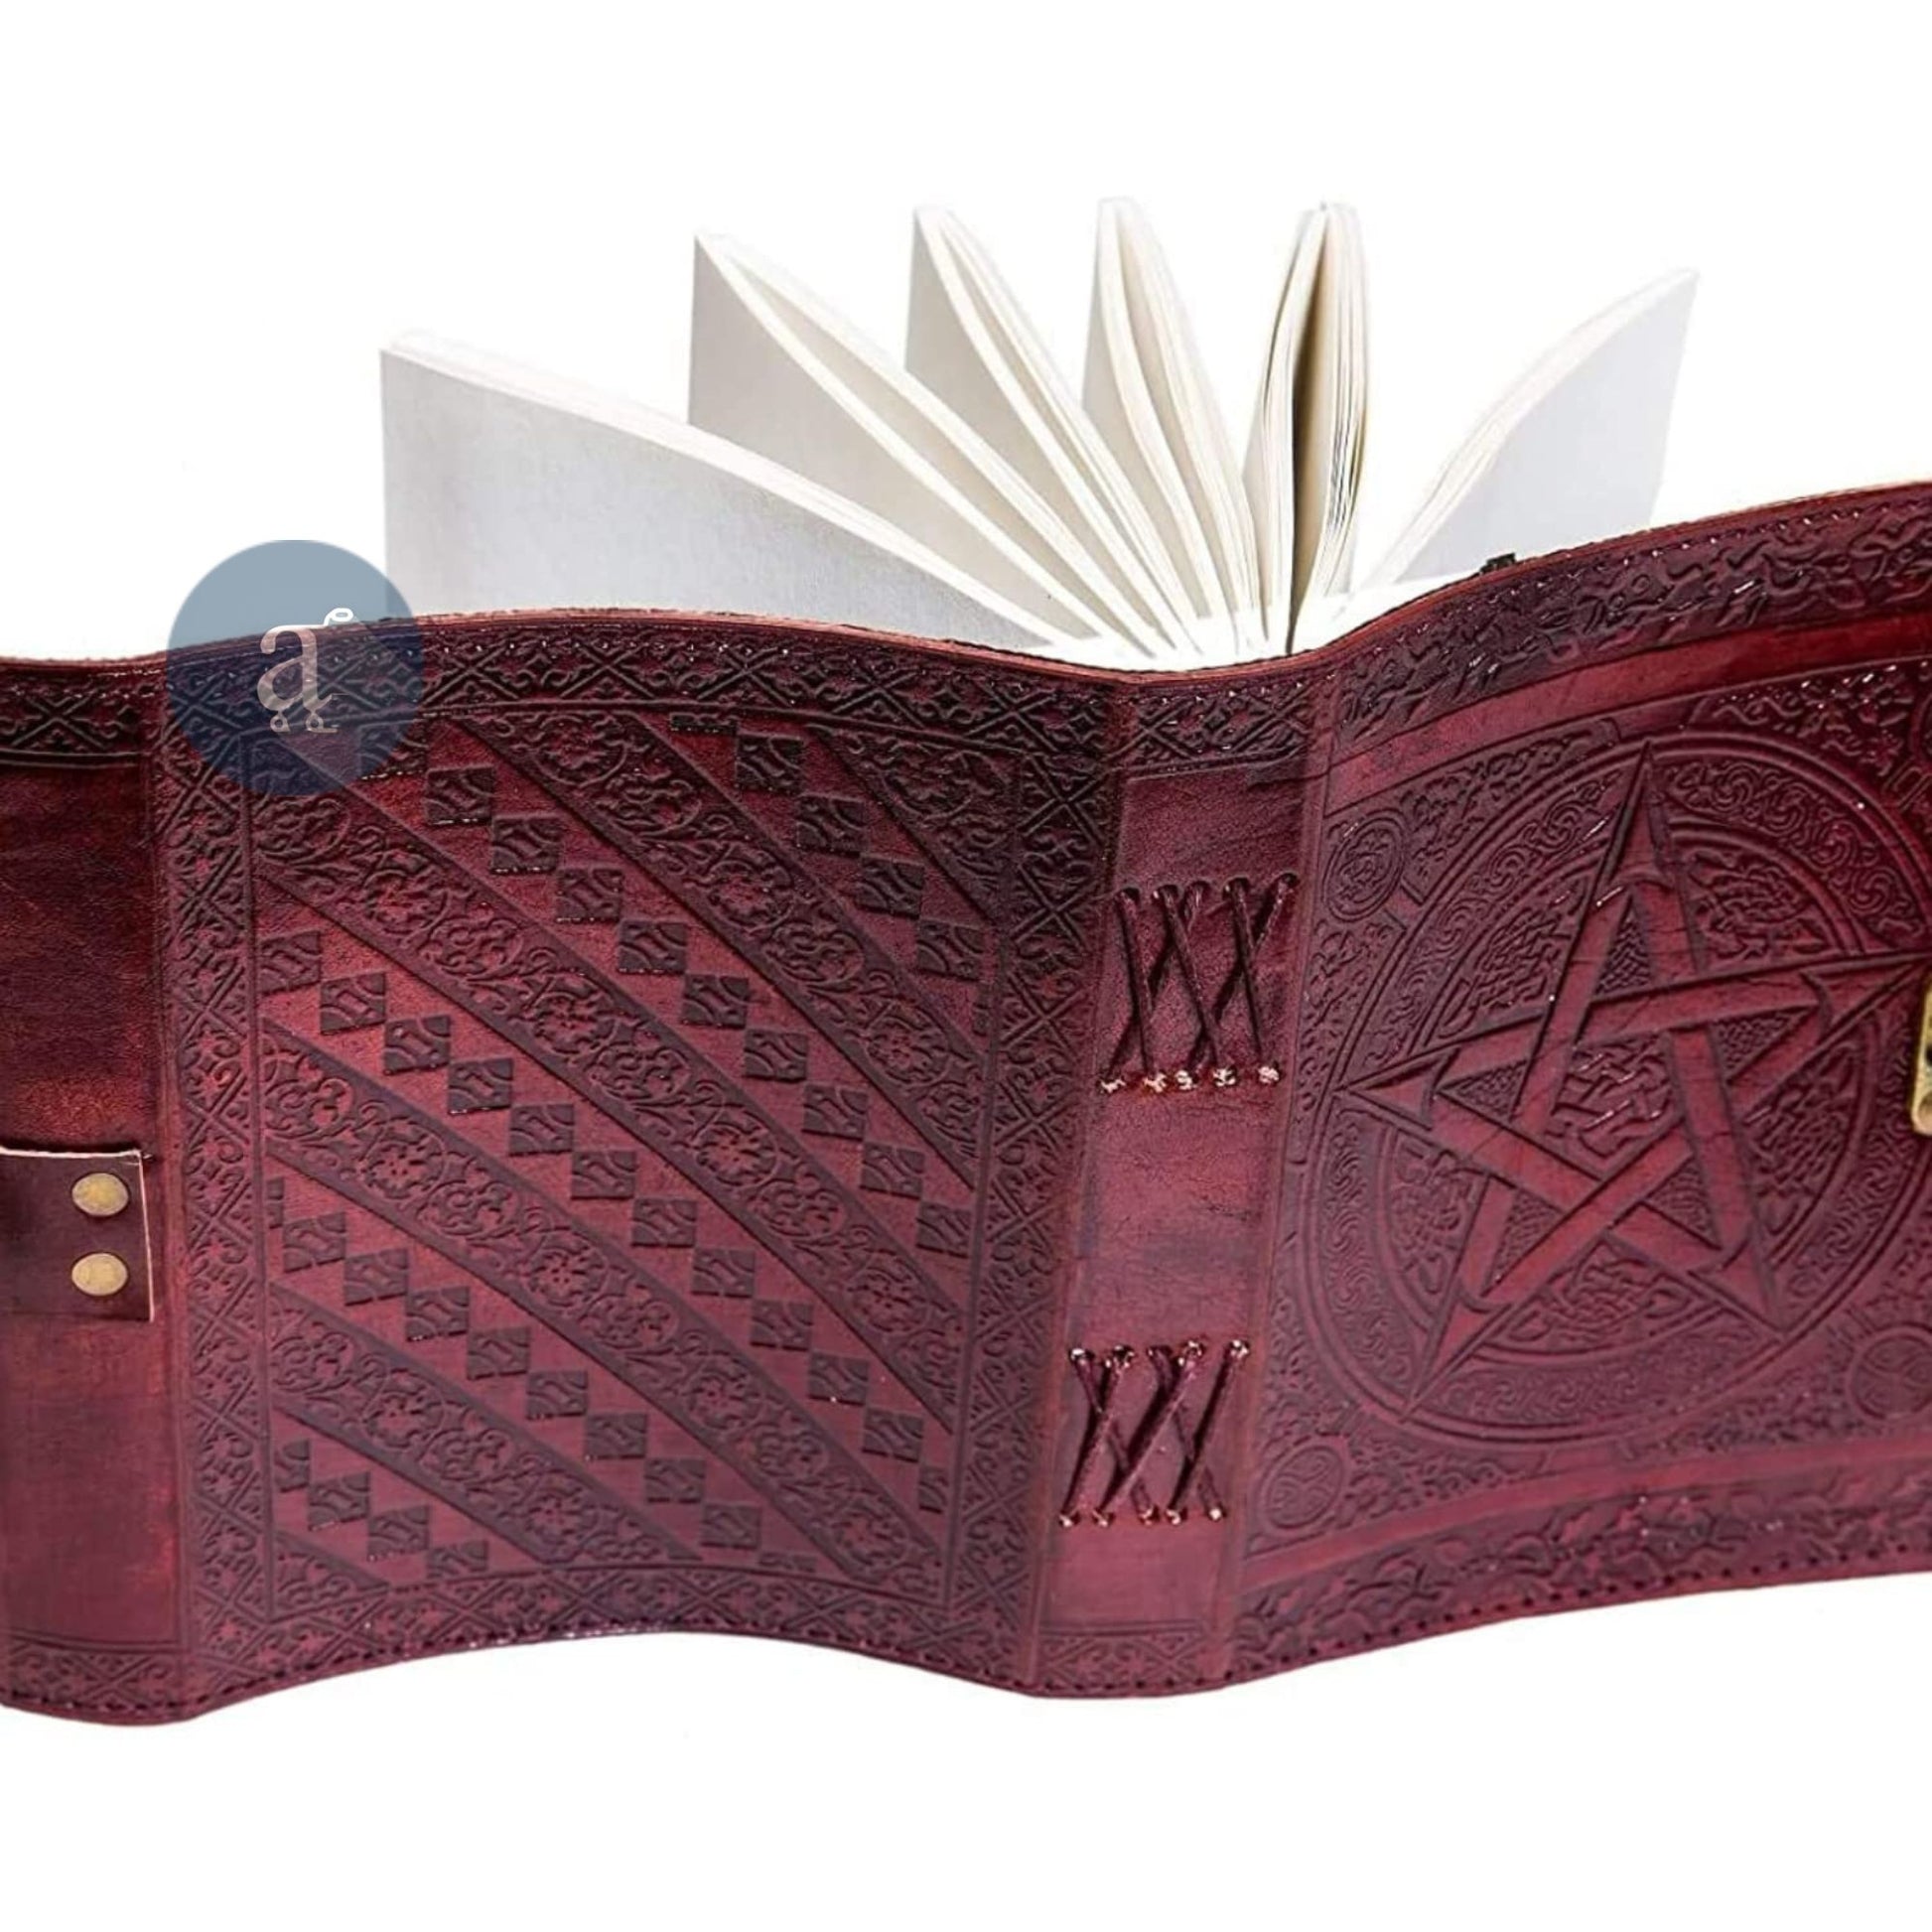 Personalized Leather Journal with Pentagram Star